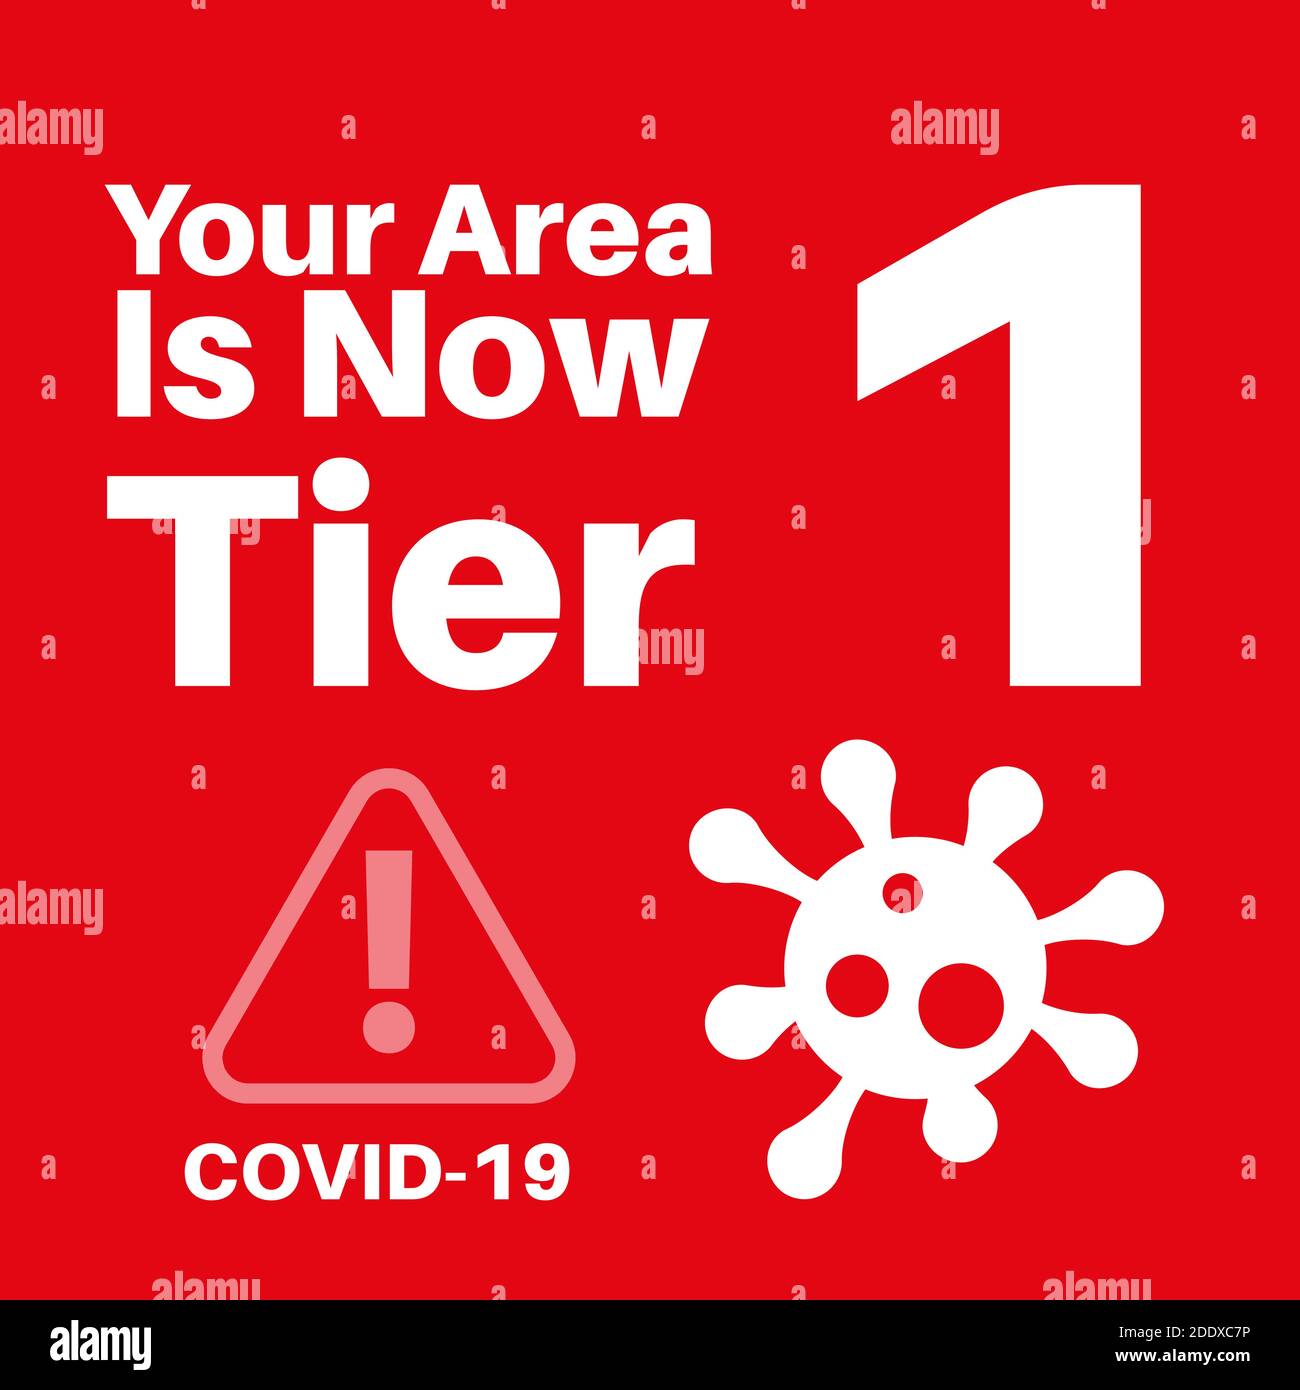 Your area is now in tier 1 covid information vector illustration on a red background Stock Vector